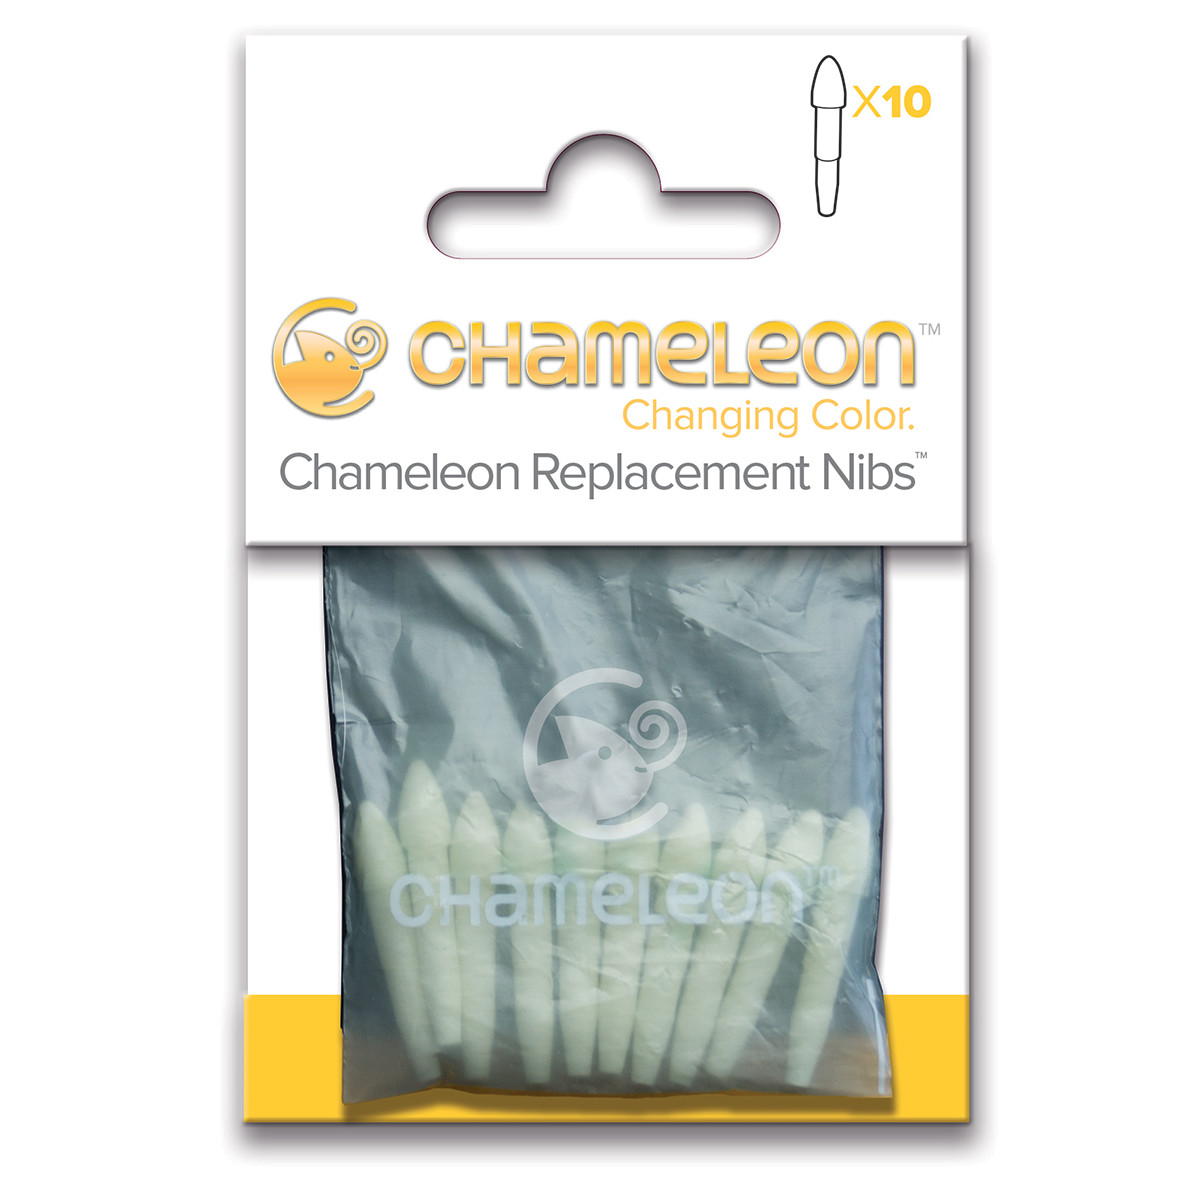 Chameleon Replacement Nibs - Mixing Tip (Pack of 10)